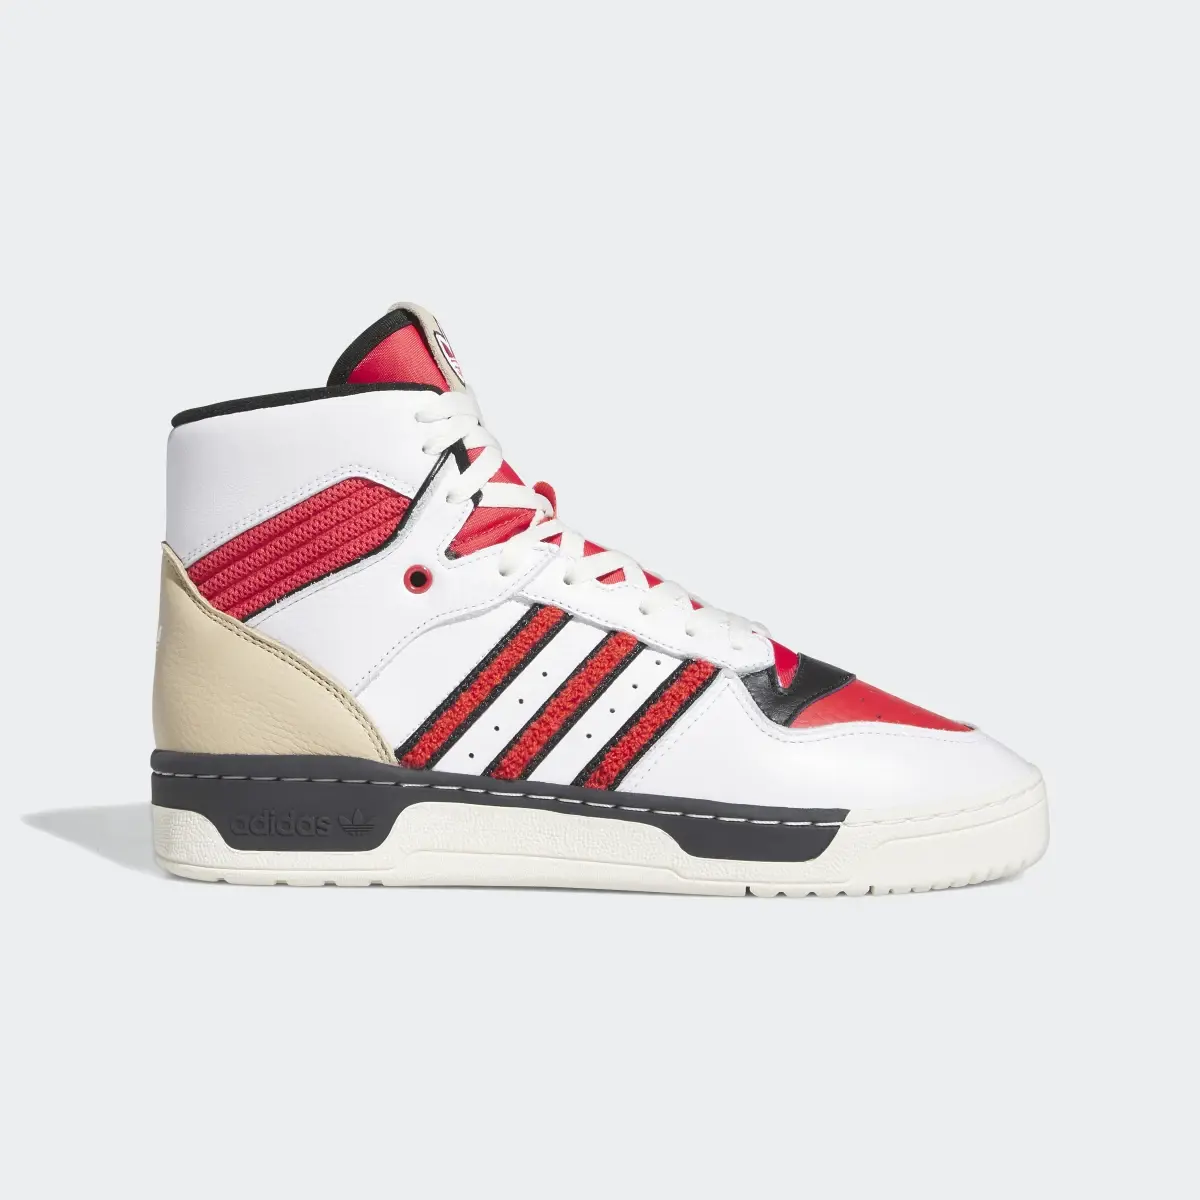 Adidas Rivalry High Shoes. 2